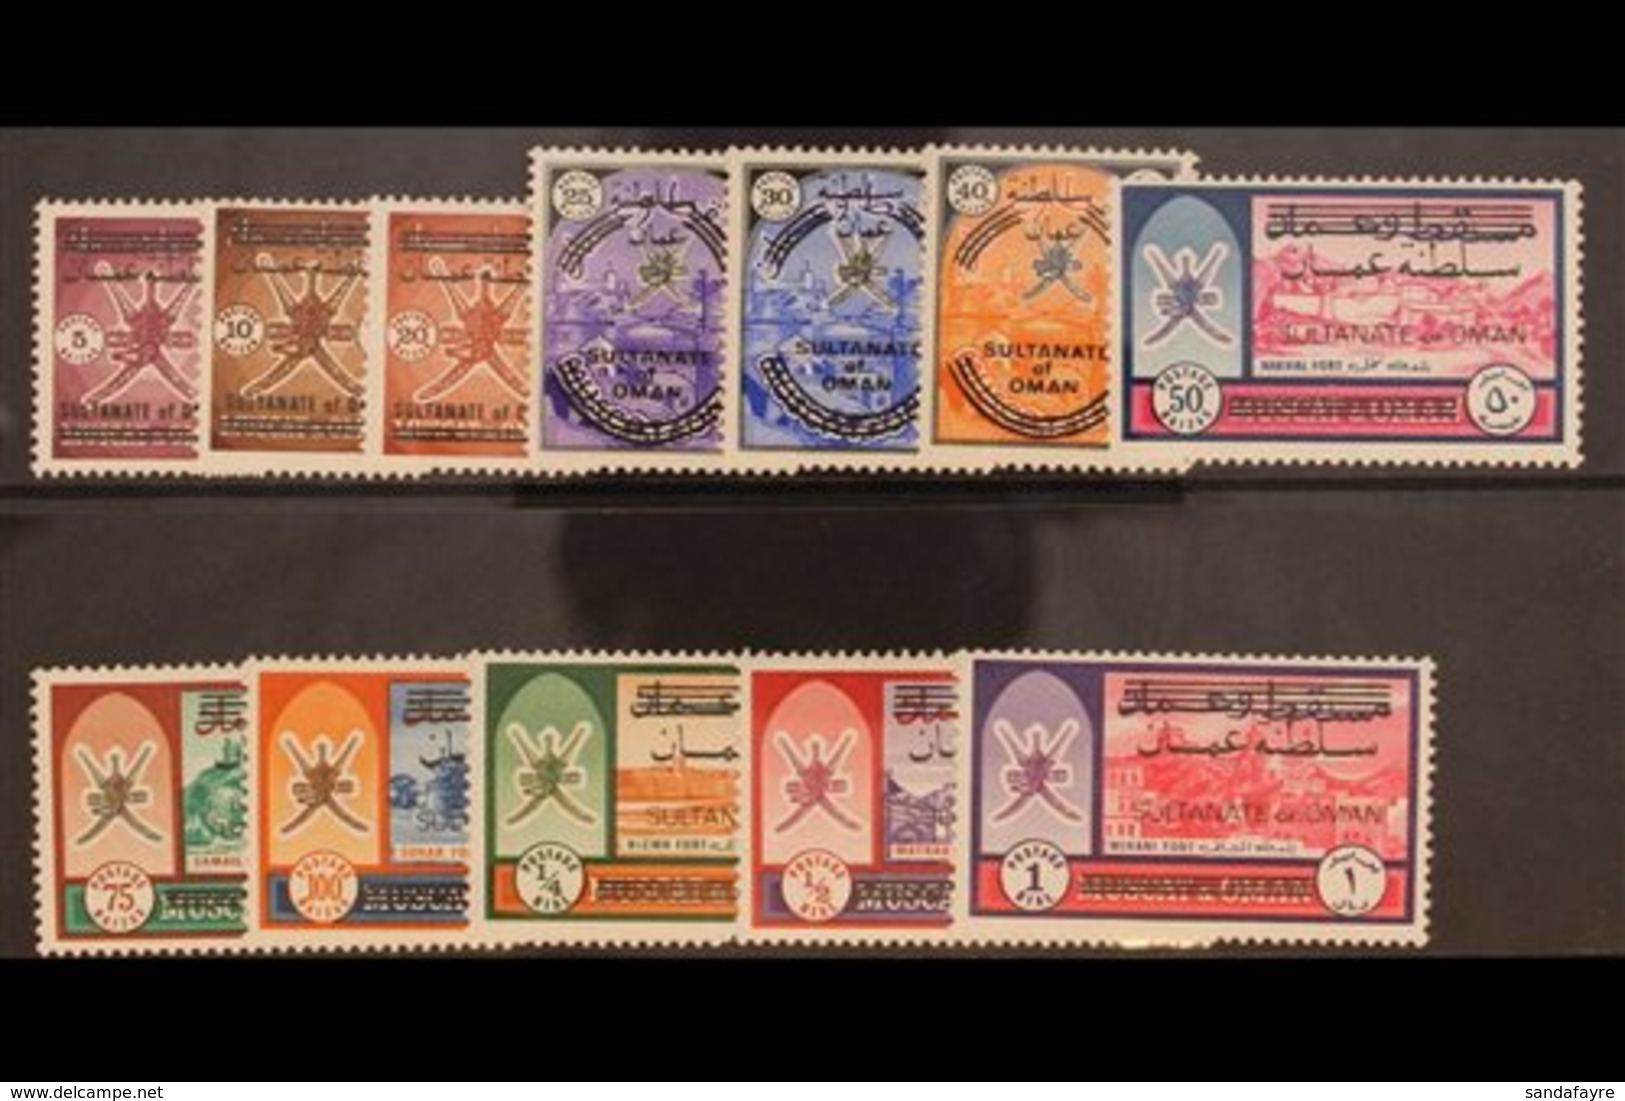 1971  Sultanate Of Oman Overprint Set Complete, SG 122/33, Very Fine Never Hinged Mint. (12 Stamps) For More Images, Ple - Oman